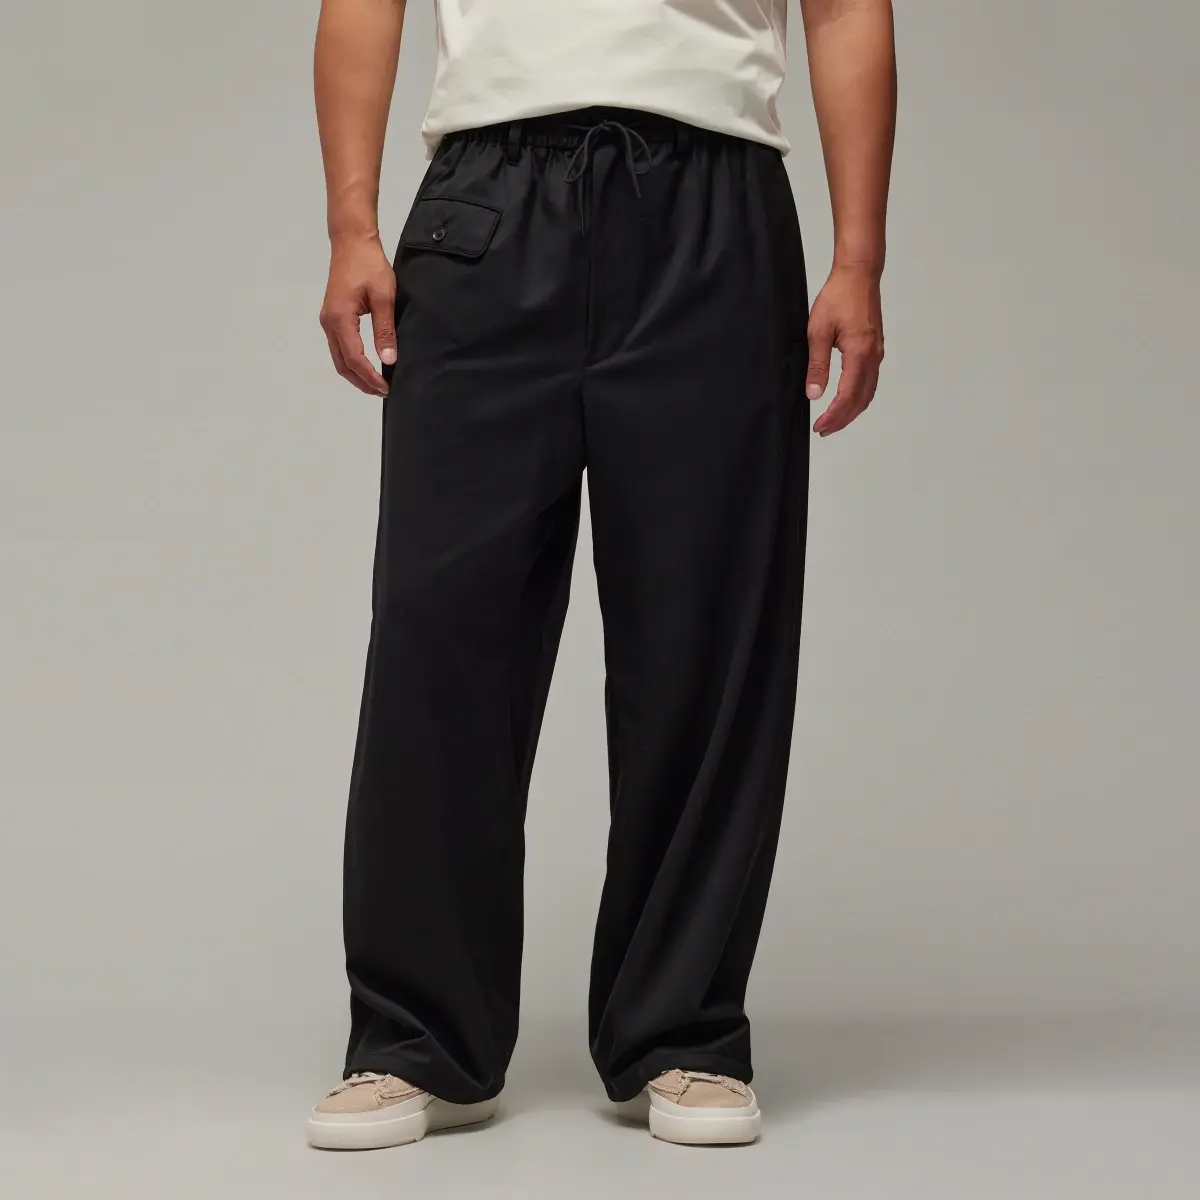 Adidas Y-3 Refined Woven Straight Leg Tracksuit Bottoms. 1